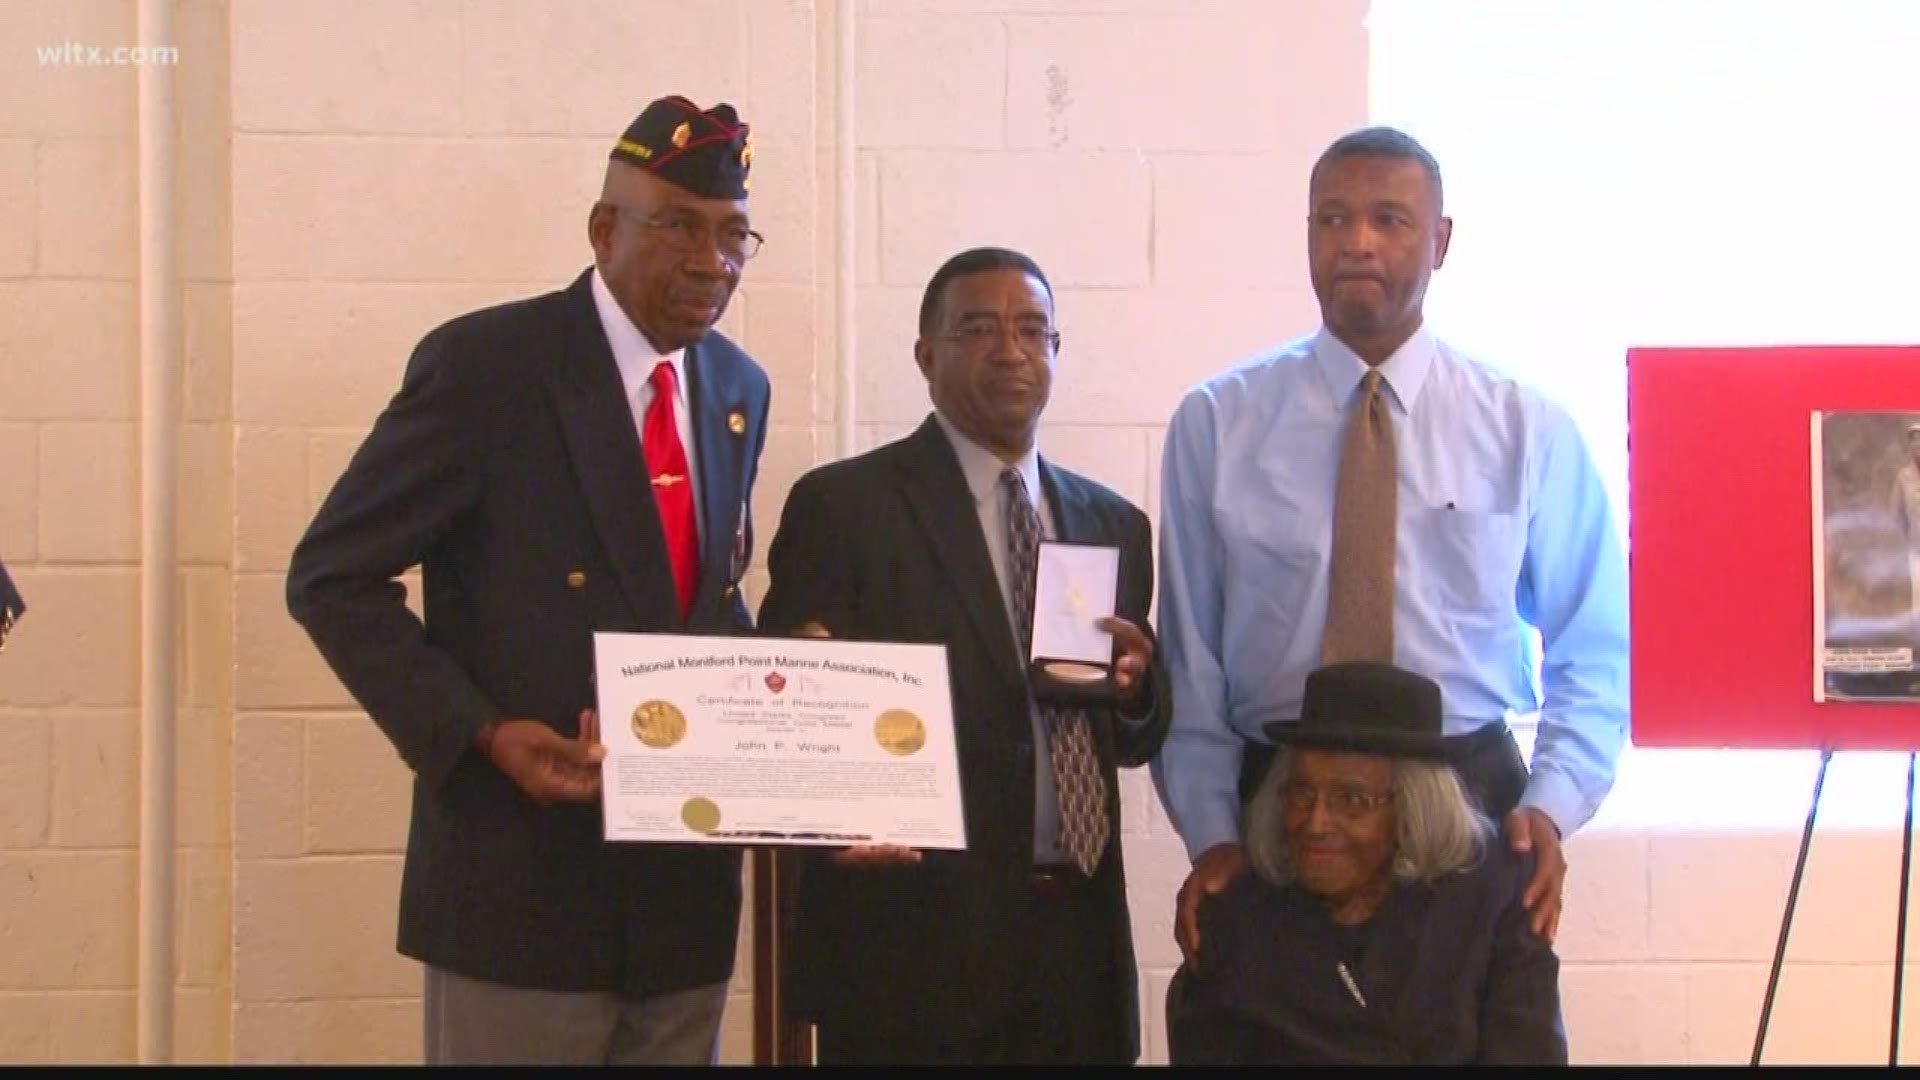 A World War II veteran received a Gold Medal of Honor on Saturday.